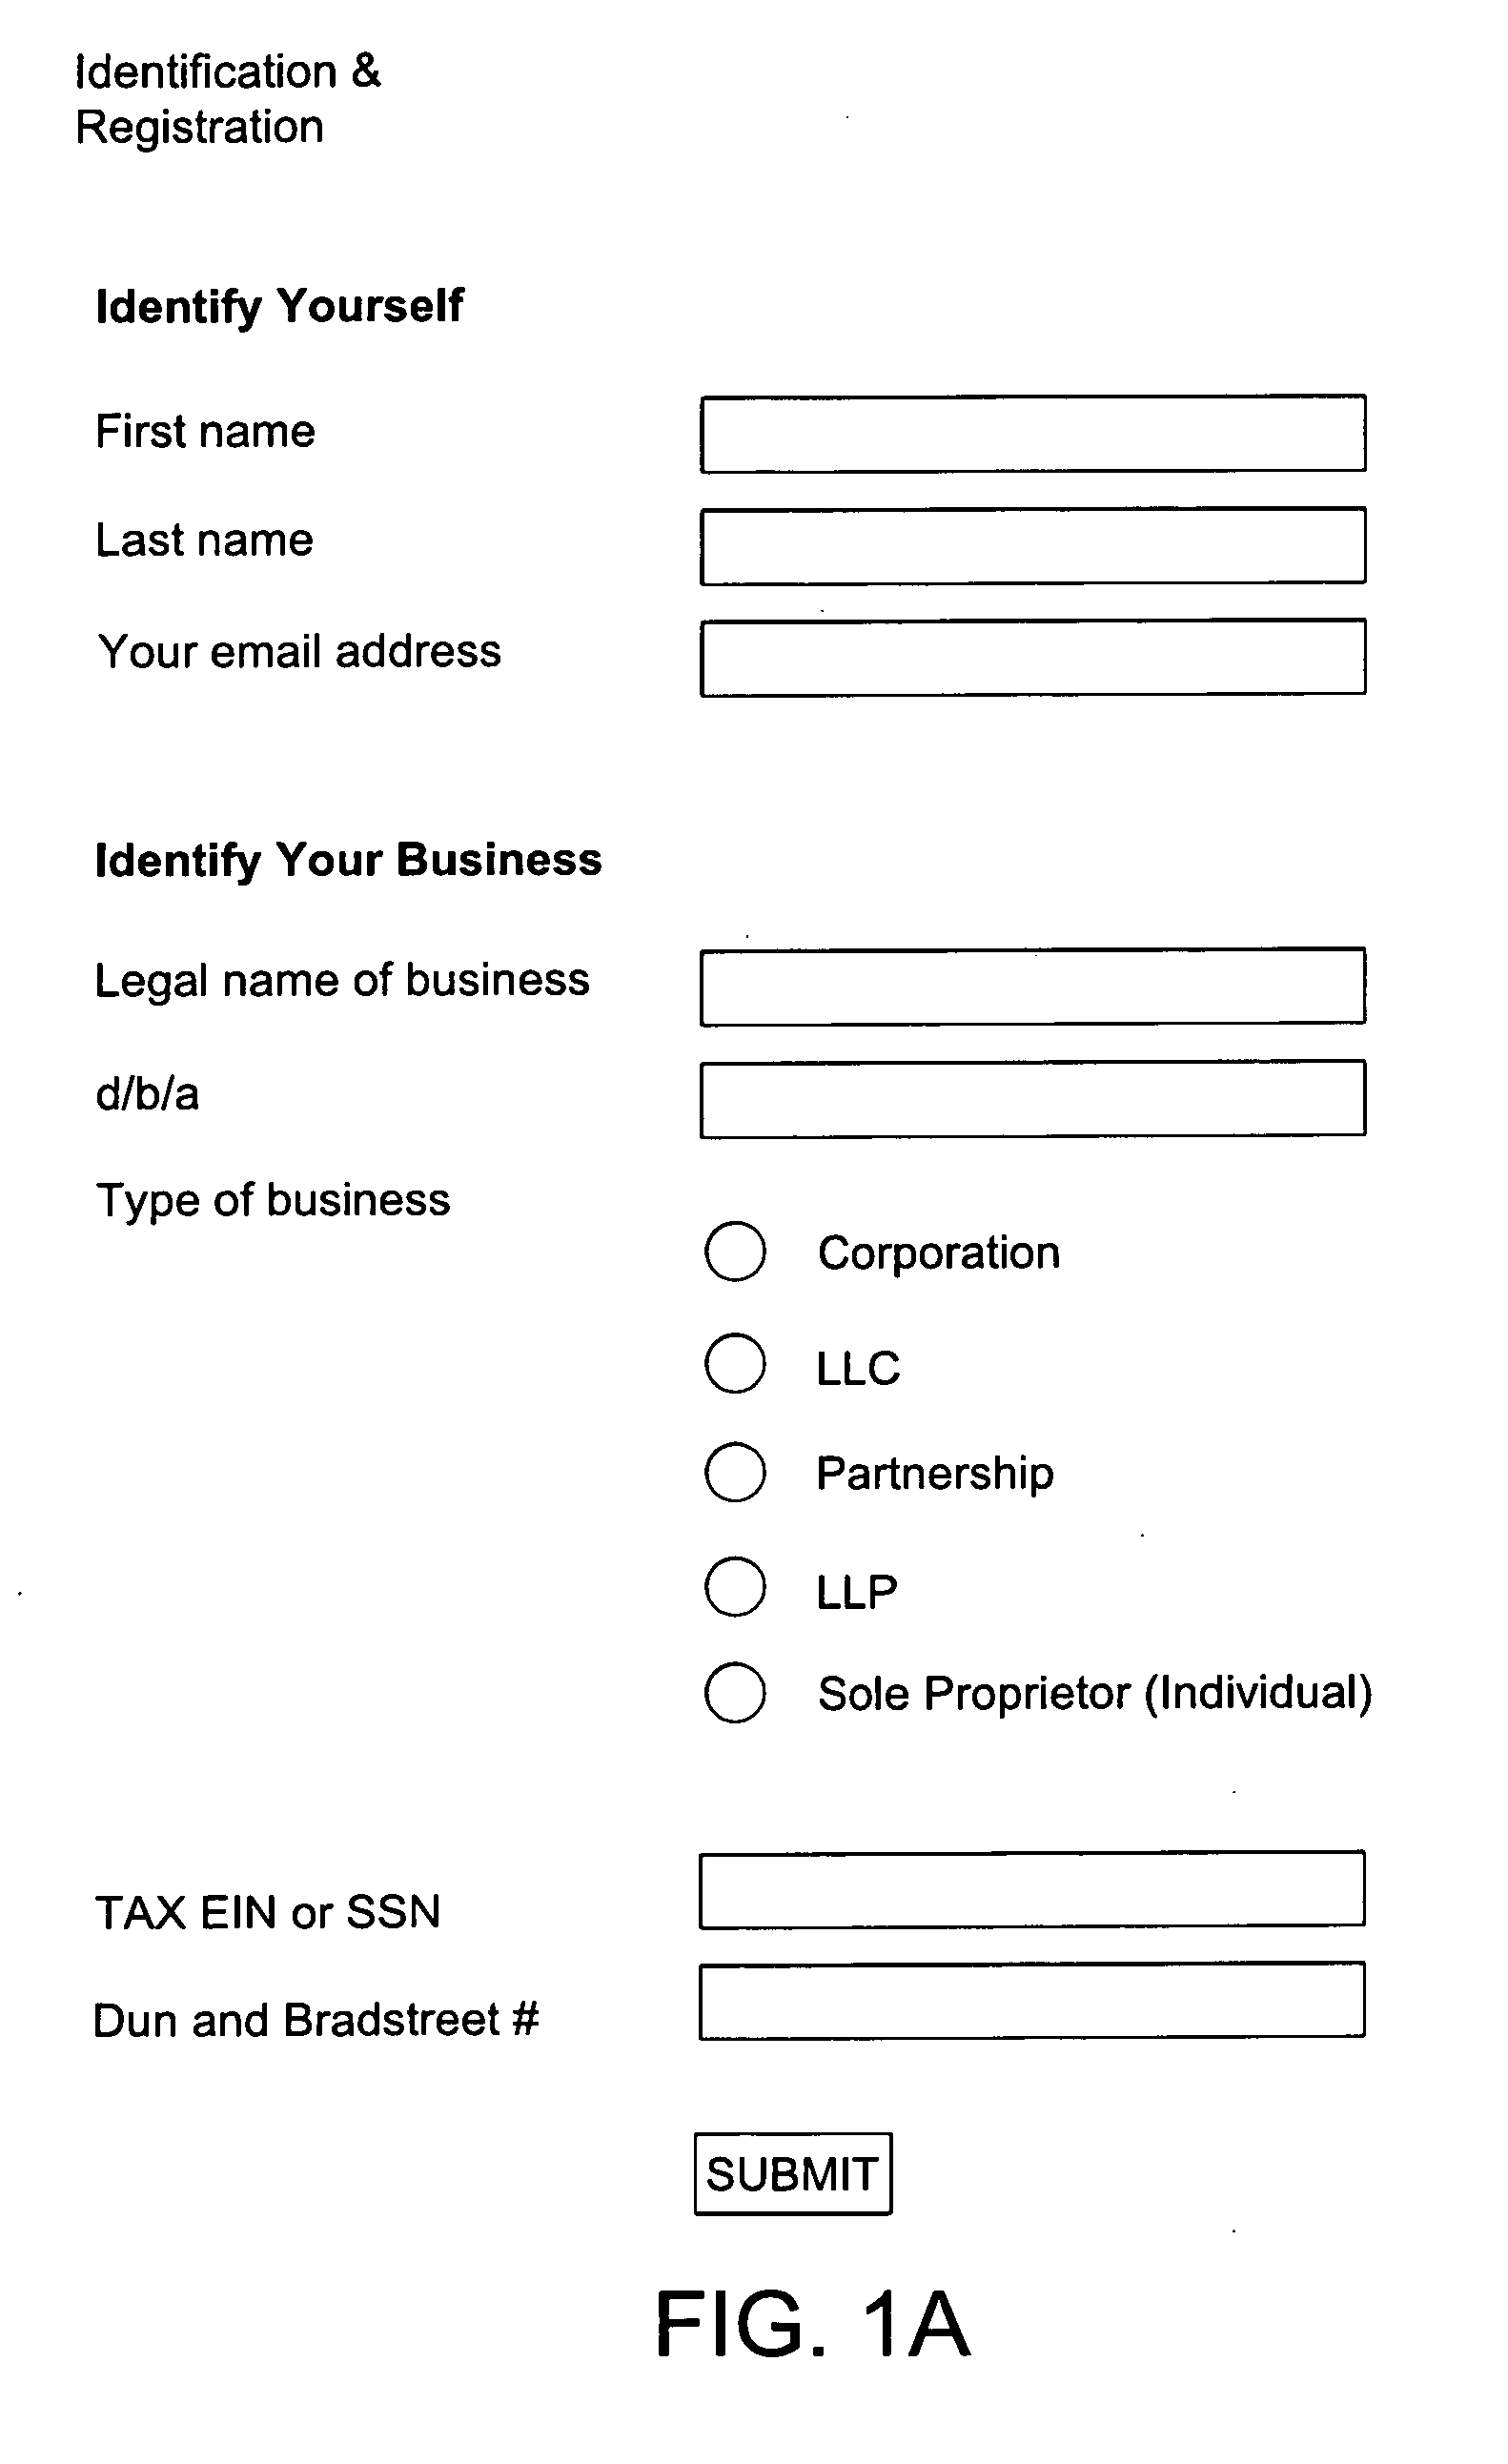 Method and system for registering, credentialing, rating, and/or cataloging businesses, organizations, and individuals on a communications network